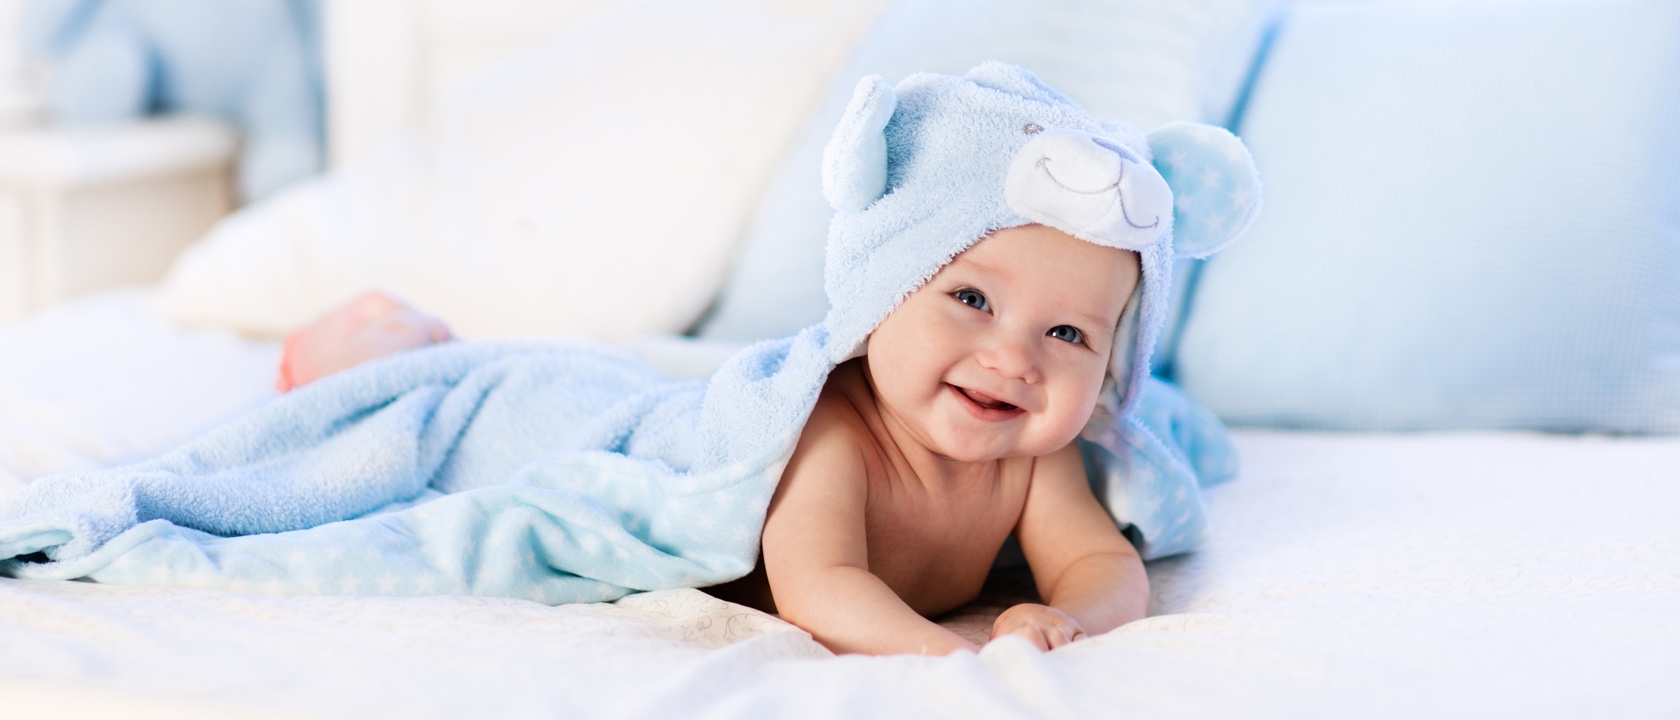 A smiling baby enjoys getting dry after a bath